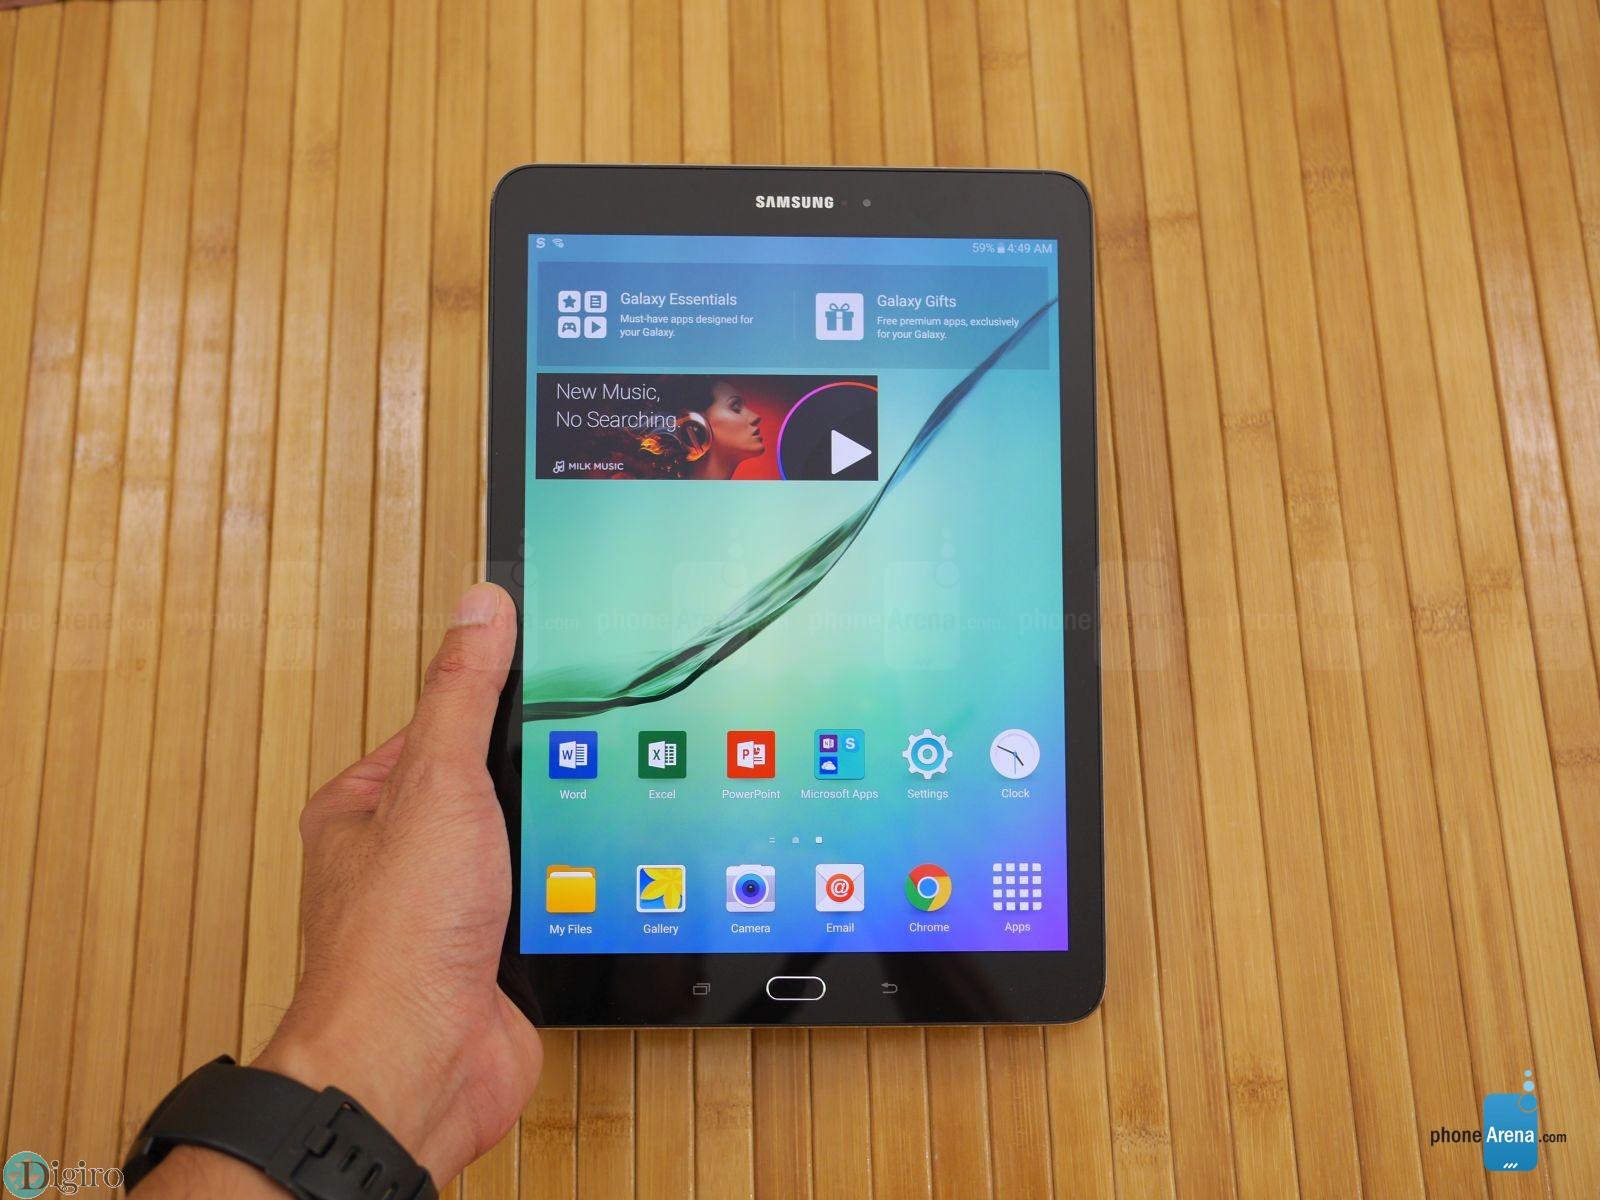 Samsung-Galaxy-Tab-S2-9.7-inch-hands-on--amp-unboxing (16)